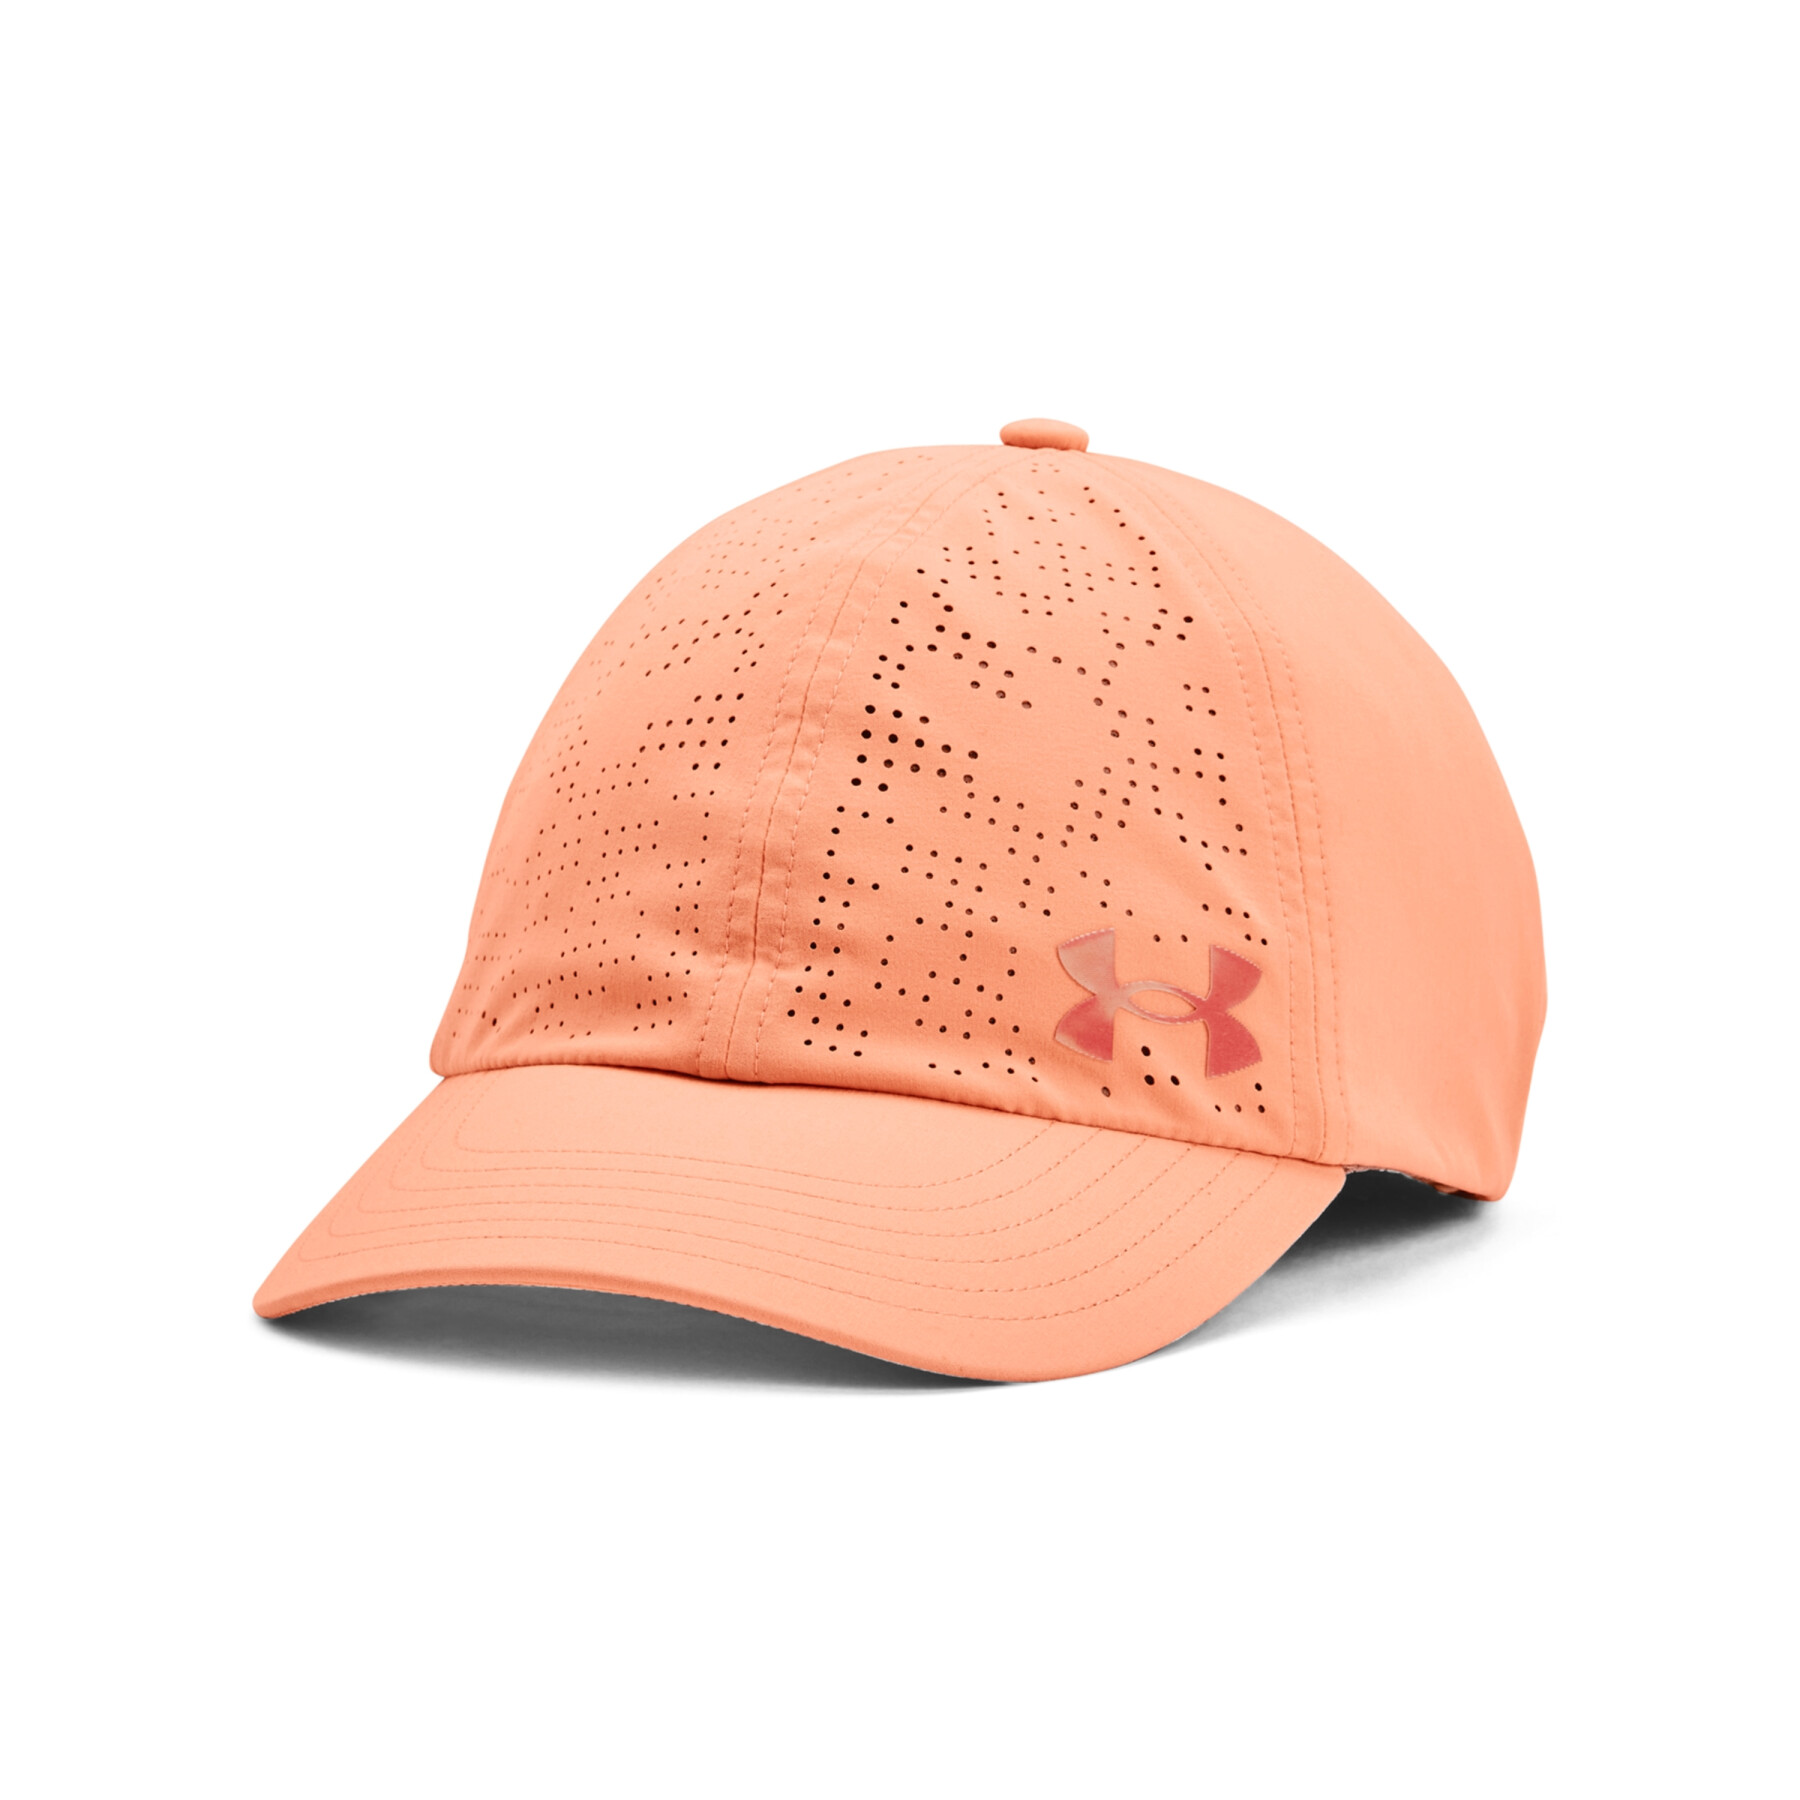 Adjustable cap for women Under Armour Iso-chill Breathe